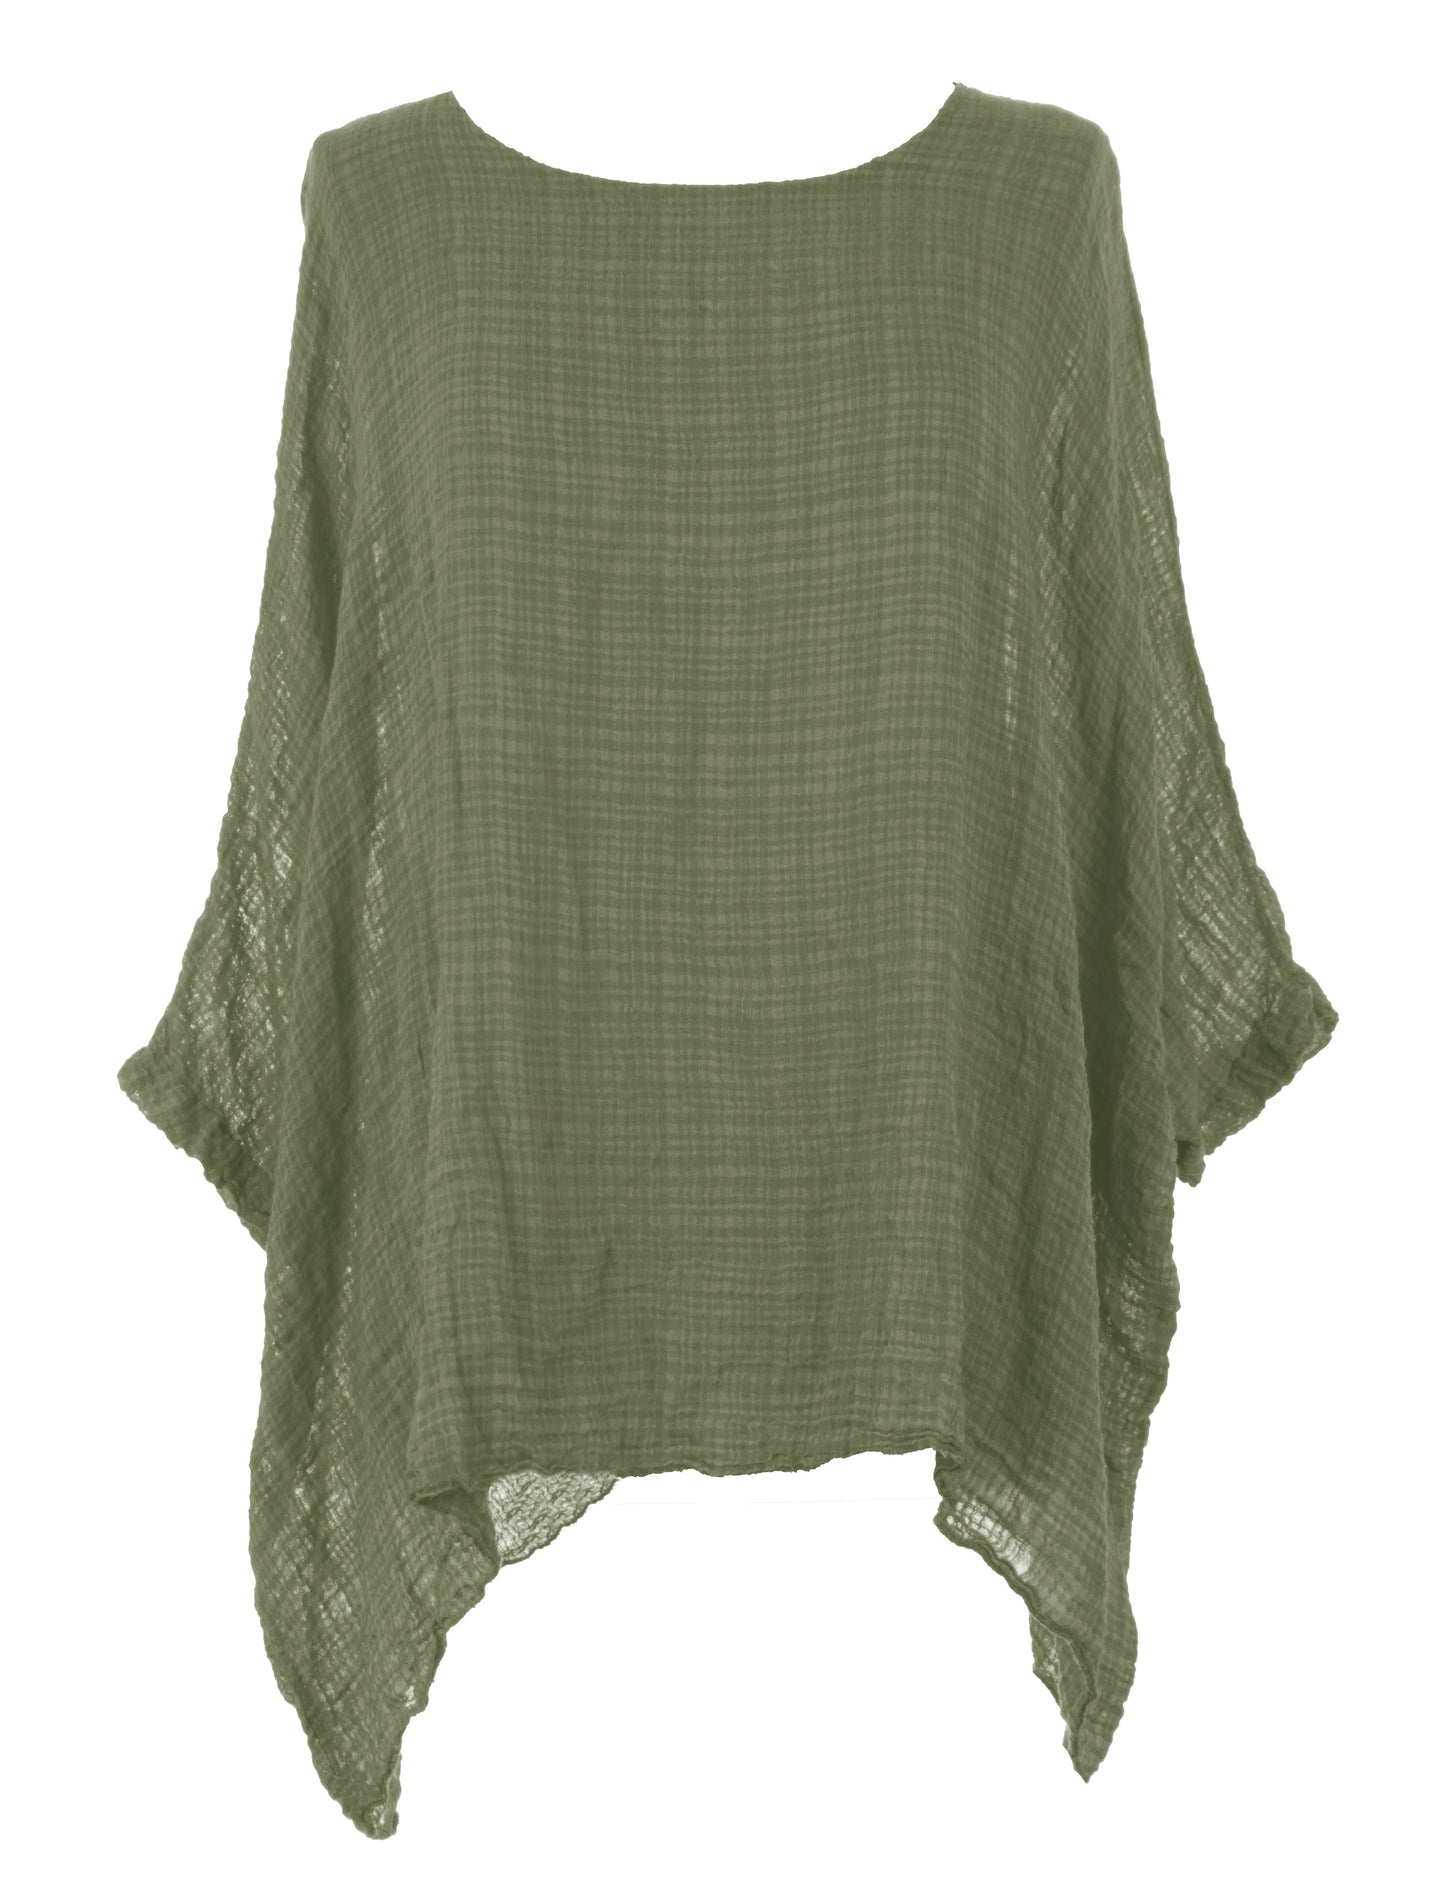 Batwing Cheesecloth Top